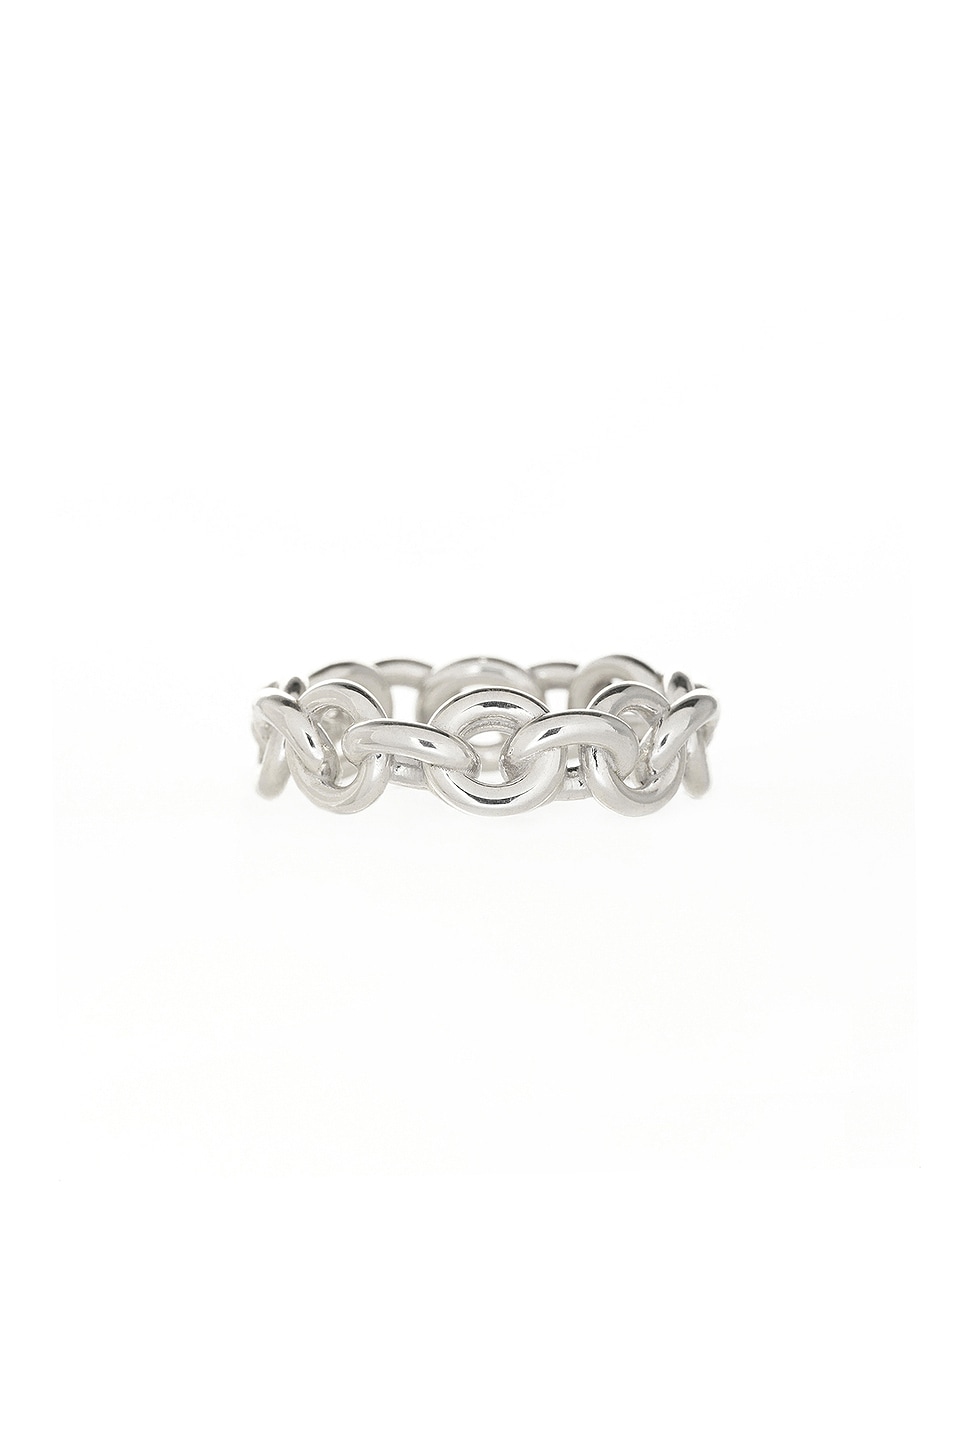 Image 1 of Spinelli Kilcollin Large Fused Serpens Ring in Sterling Silver